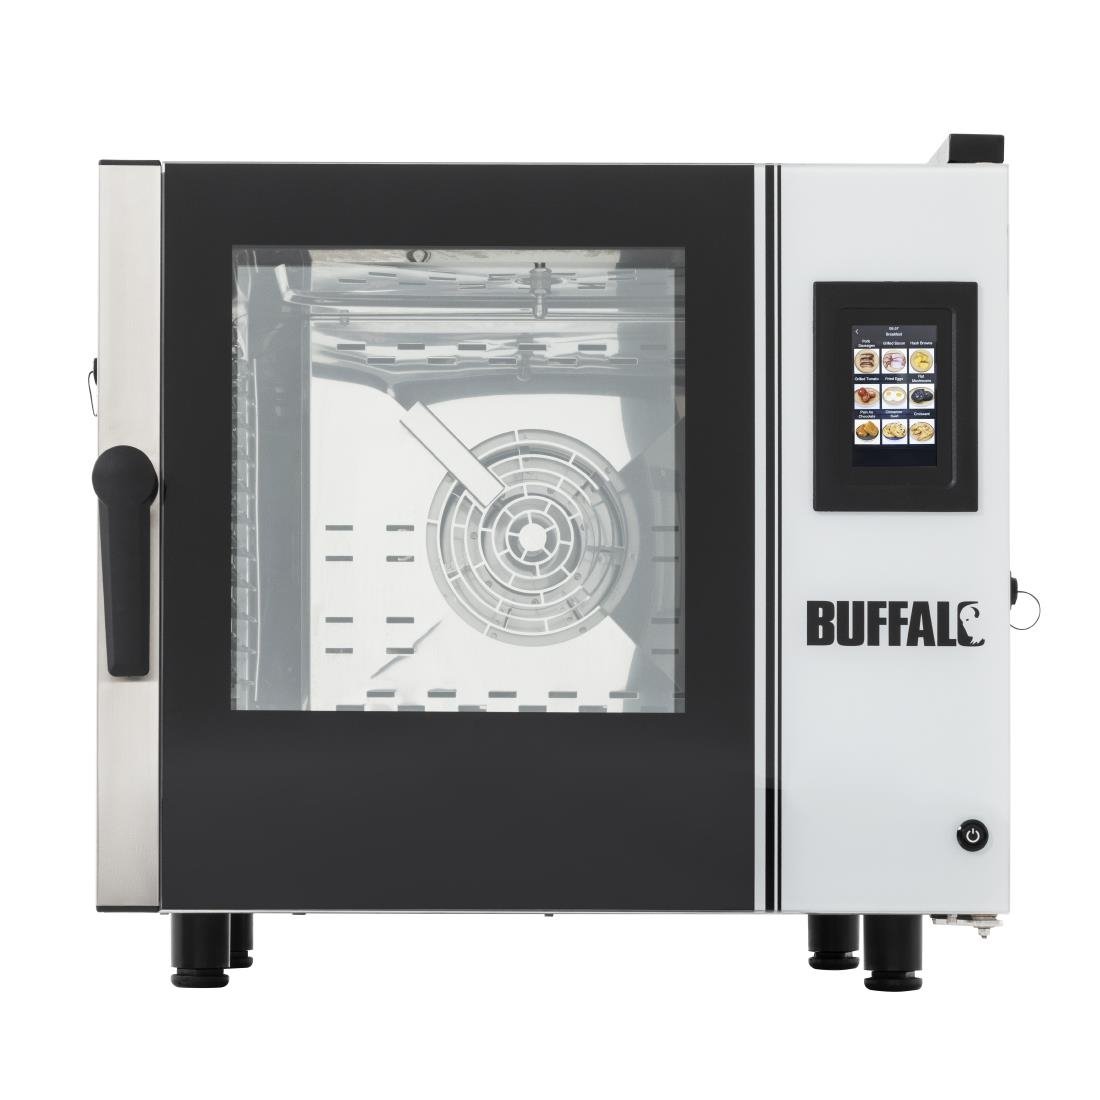 SA773 Buffalo Freestanding Smart Touchscreen Compact Combi Oven  6 x GN 1/1 with Installation Kit and Extraction Hood